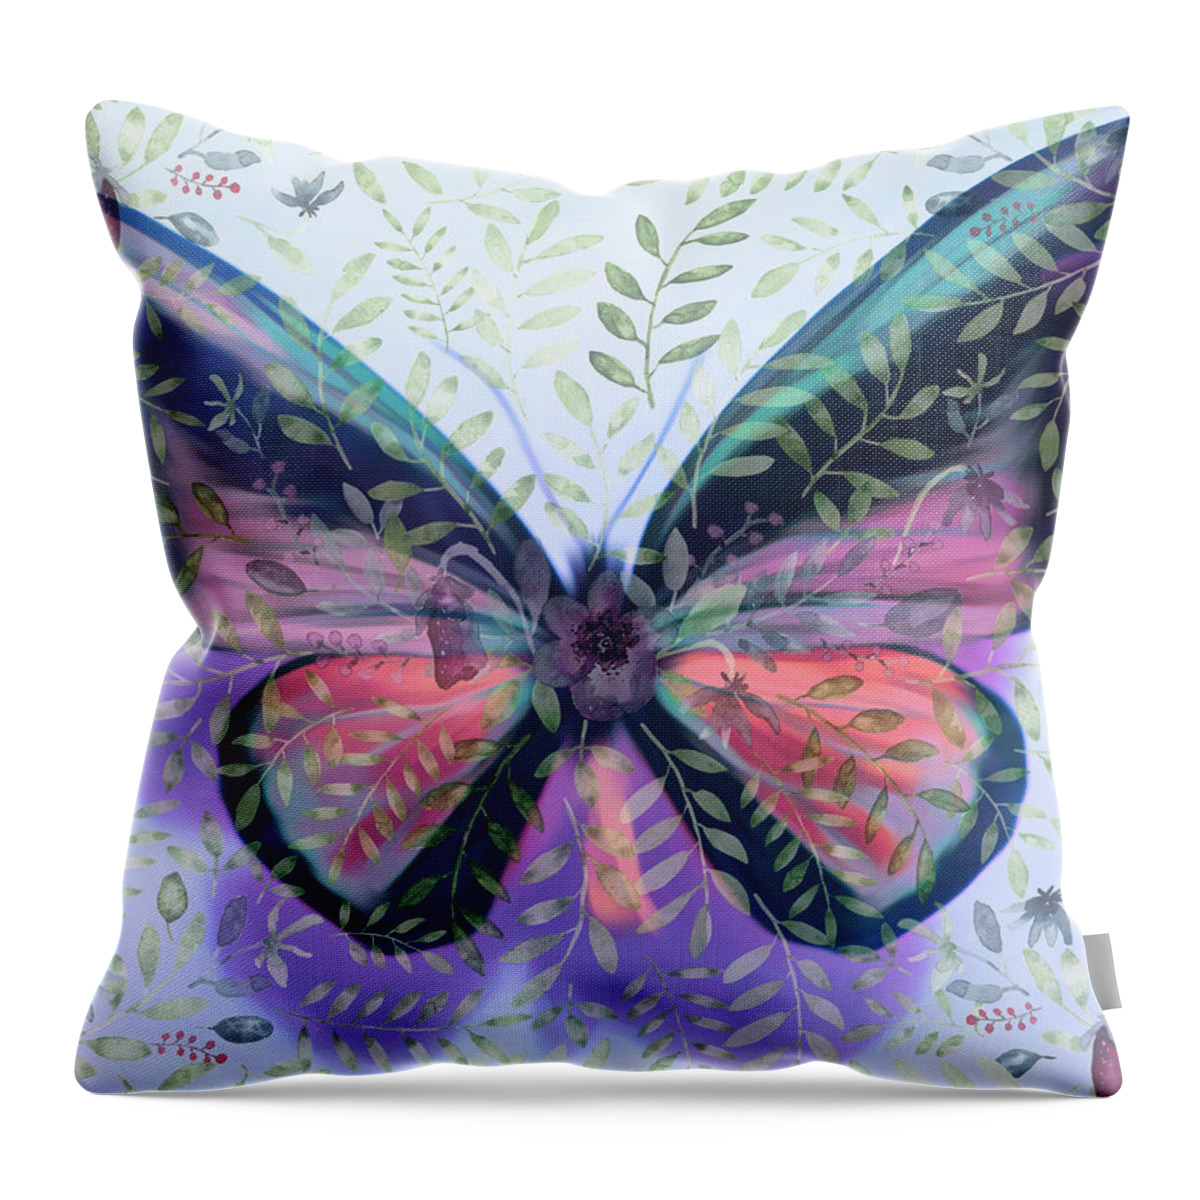 Butterfly Throw Pillow featuring the mixed media Butterfly Garden Fantasy by Rosalie Scanlon